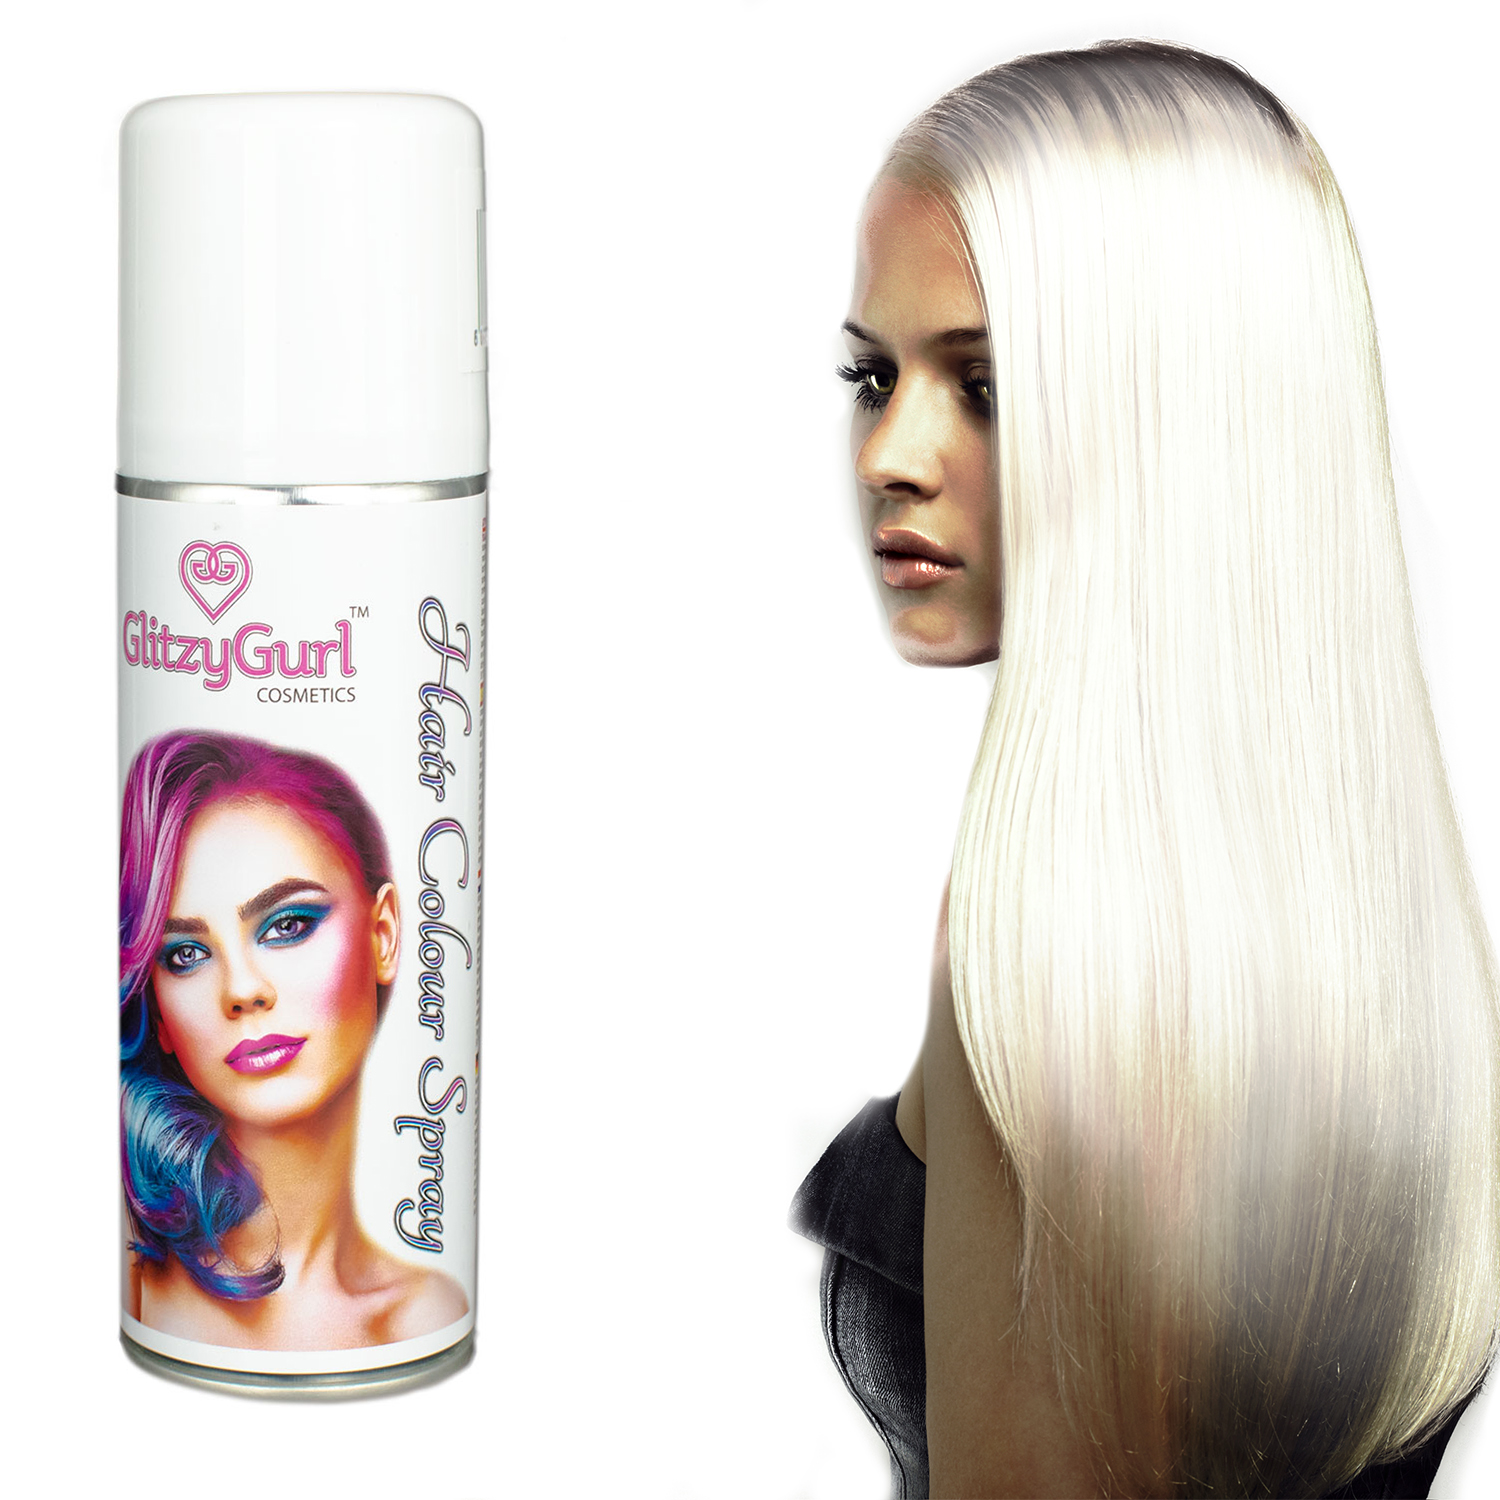 Top 100 image colored spray for hair - Thptnganamst.edu.vn